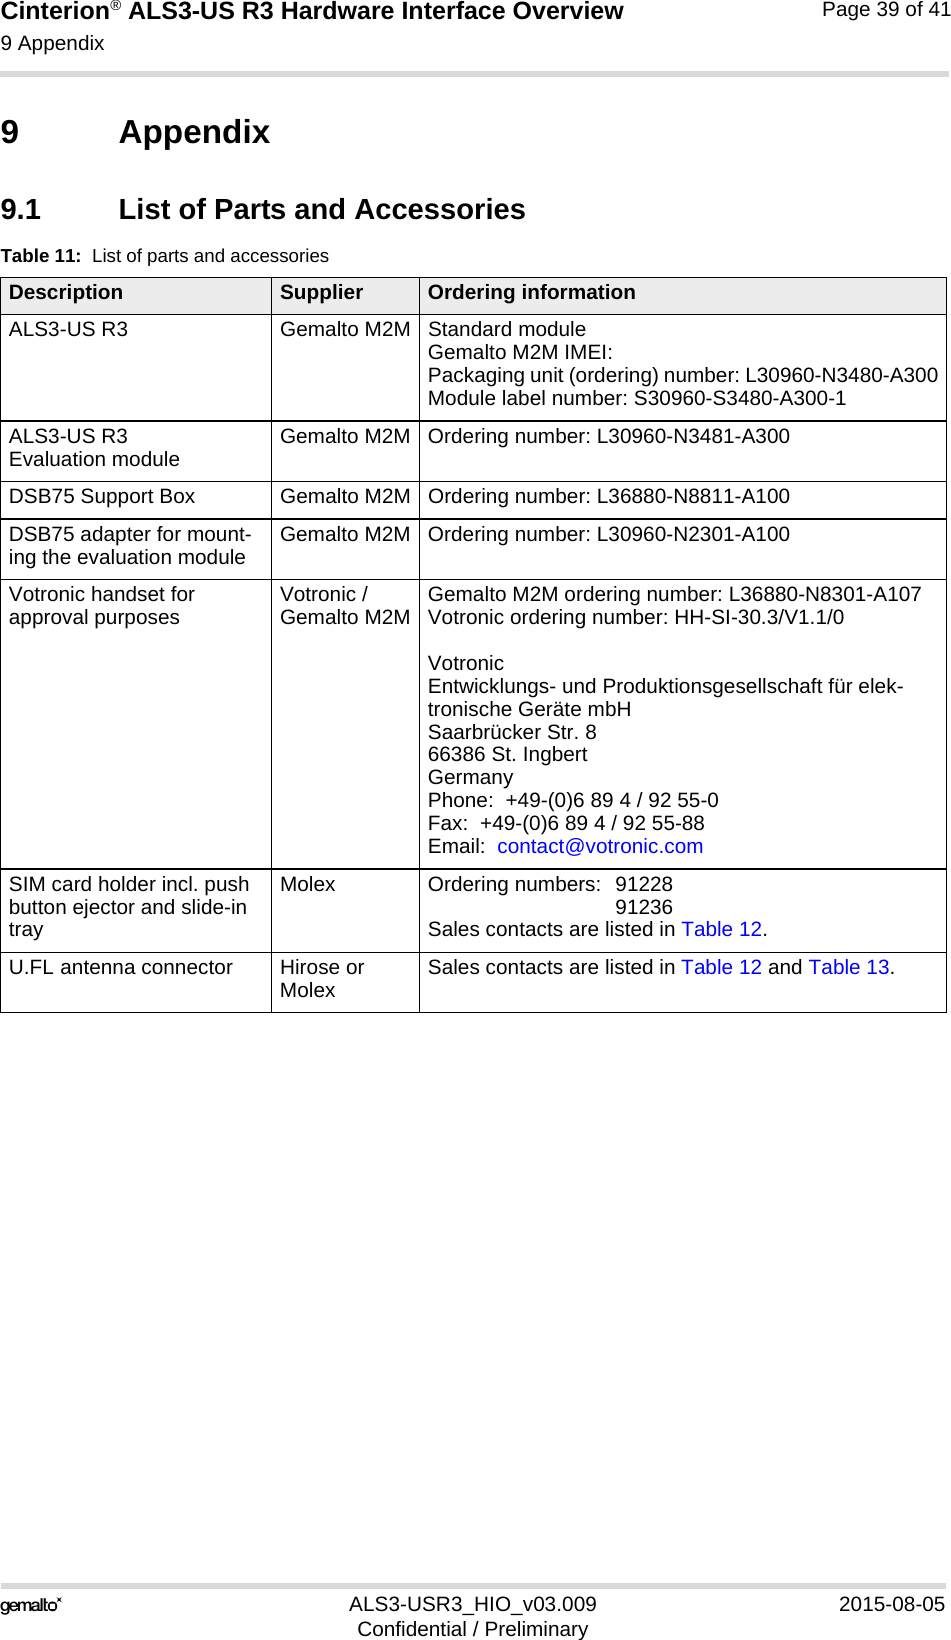 Cinterion® ALS3-US R3 Hardware Interface Overview9 Appendix40ALS3-USR3_HIO_v03.009 2015-08-05Confidential / PreliminaryPage 39 of 419 Appendix9.1 List of Parts and AccessoriesTable 11:  List of parts and accessoriesDescription Supplier Ordering informationALS3-US R3 Gemalto M2M Standard module Gemalto M2M IMEI:Packaging unit (ordering) number: L30960-N3480-A300Module label number: S30960-S3480-A300-1ALS3-US R3 Evaluation module Gemalto M2M Ordering number: L30960-N3481-A300DSB75 Support Box Gemalto M2M Ordering number: L36880-N8811-A100DSB75 adapter for mount-ing the evaluation module Gemalto M2M Ordering number: L30960-N2301-A100Votronic handset for approval purposes Votronic / Gemalto M2M Gemalto M2M ordering number: L36880-N8301-A107Votronic ordering number: HH-SI-30.3/V1.1/0Votronic Entwicklungs- und Produktionsgesellschaft für elek-tronische Geräte mbHSaarbrücker Str. 866386 St. IngbertGermanyPhone:  +49-(0)6 89 4 / 92 55-0Fax:  +49-(0)6 89 4 / 92 55-88Email:  contact@votronic.comSIM card holder incl. push button ejector and slide-in trayMolex Ordering numbers:  91228 91236Sales contacts are listed in Table 12.U.FL antenna connector Hirose or Molex Sales contacts are listed in Table 12 and Table 13.